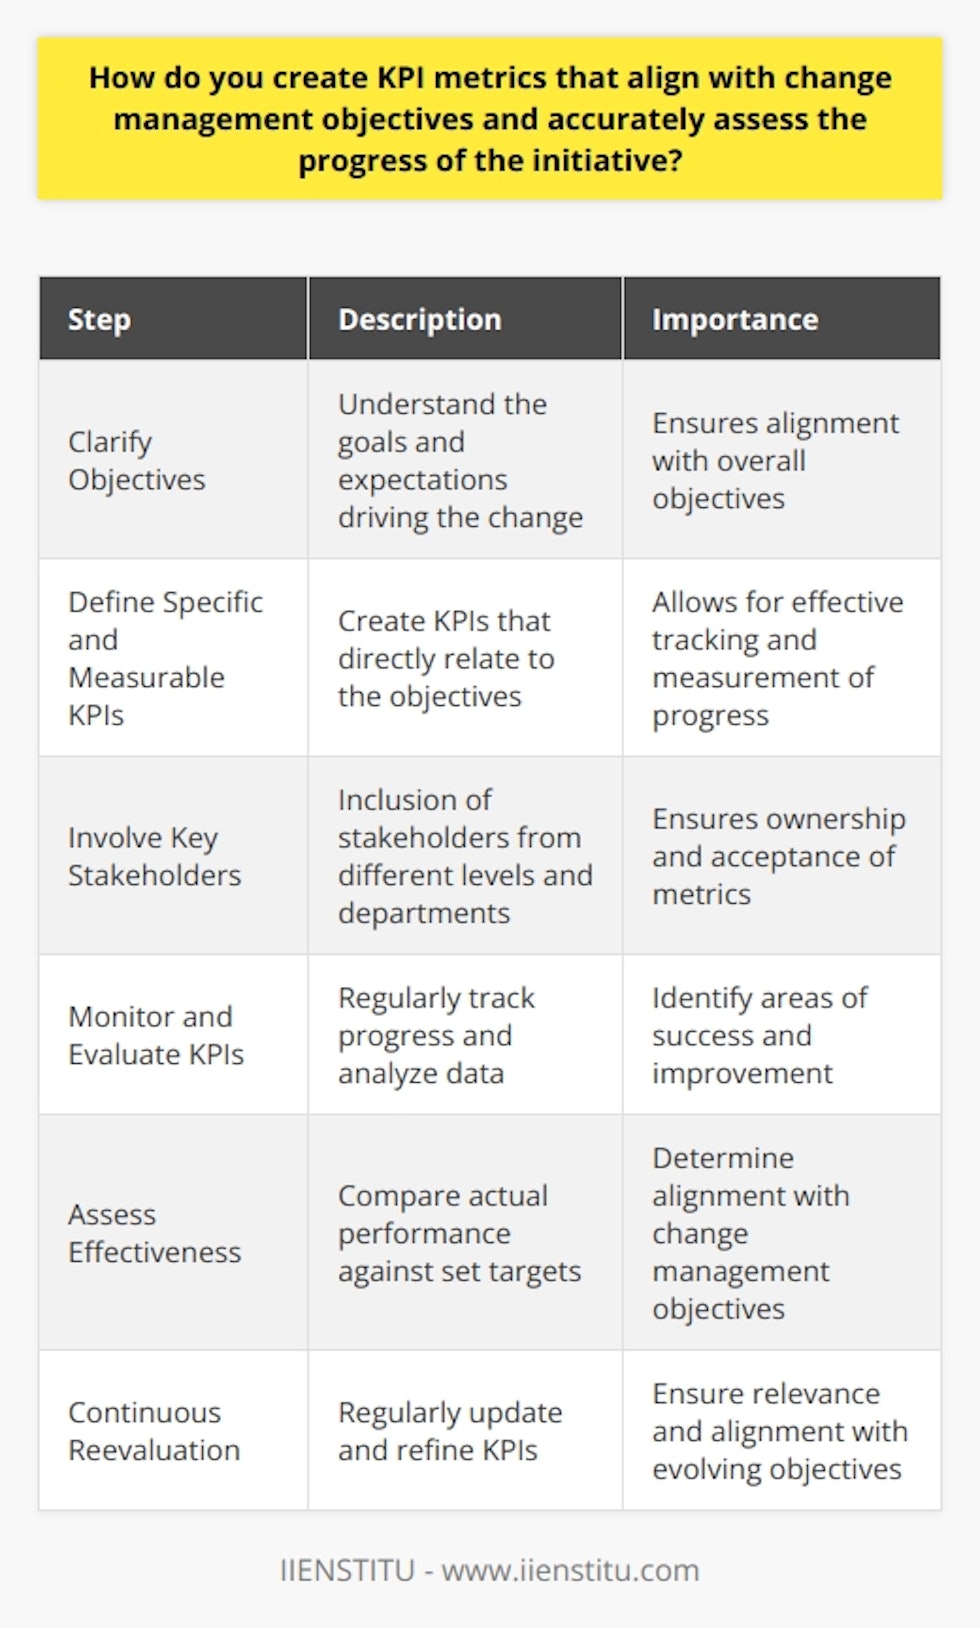 Creating Key Performance Indicator (KPI) metrics that align with change management objectives is essential for accurately assessing the progress of an initiative. By following a systematic process, organizations can ensure that the KPIs they set reflect their objectives and contribute to the overall success of the change management initiative.The first step in creating KPI metrics is to clarify the change management objectives. This involves understanding the goals and expectations driving the change. By clearly defining these objectives, organizations can determine what they want to achieve through the change management initiative.Once the objectives are clear, the next step is to define specific and measurable KPIs that directly relate to these objectives. Using the SMART criteria - Specific, Measurable, Achievable, Relevant, Time-bound - helps ensure that each KPI is effective and relevant. This means that the KPIs should be specific enough to provide meaningful insights, measurable to track progress and performance, achievable within the given resources and capabilities, relevant to the change management objectives, and time-bound to set a clear target.Involving key stakeholders in setting these KPI targets is crucial for ensuring ownership and acceptance of the metrics. By including stakeholders from different levels and departments within the organization, organizations can gain diverse perspectives and ensure that the KPIs reflect the needs and expectations of all stakeholders. This step is essential to prevent resistance or lack of adherence to the KPIs.Regularly monitoring and evaluating the KPI metrics is vital to assess progress accurately. This involves tracking the progress of the initiative and analyzing the data to identify areas of success and those that need improvement. By using dashboards or visual presentations, organizations can easily assess the data and identify any issues or trends that may require attention. Continuous monitoring and evaluation enable organizations to take corrective actions early if targets are not being met.Assessing the effectiveness of KPI metrics involves conducting regular reviews and data analysis. By comparing actual performance against the set targets, organizations can determine how well the KPIs align with their change management objectives. This assessment helps identify any gaps or areas for improvement and enables organizations to make necessary adjustments in their strategies or tactics.Continuous reevaluation and adjustment of KPI metrics are crucial due to the dynamic nature of change management. What worked yesterday may not be effective today, as the organization and its environment continue to evolve. Regularly updating and refining the KPIs ensure that they remain relevant and aligned with the changing objectives and circumstances.In conclusion, creating KPI metrics that align with change management objectives involves clarifying objectives, defining relevant metrics, involving stakeholders, regularly monitoring progress, and assessing the effectiveness of the metrics. By following this process and continuously reevaluating the KPIs, organizations can accurately assess the progress of their change management initiatives and achieve their desired goals.